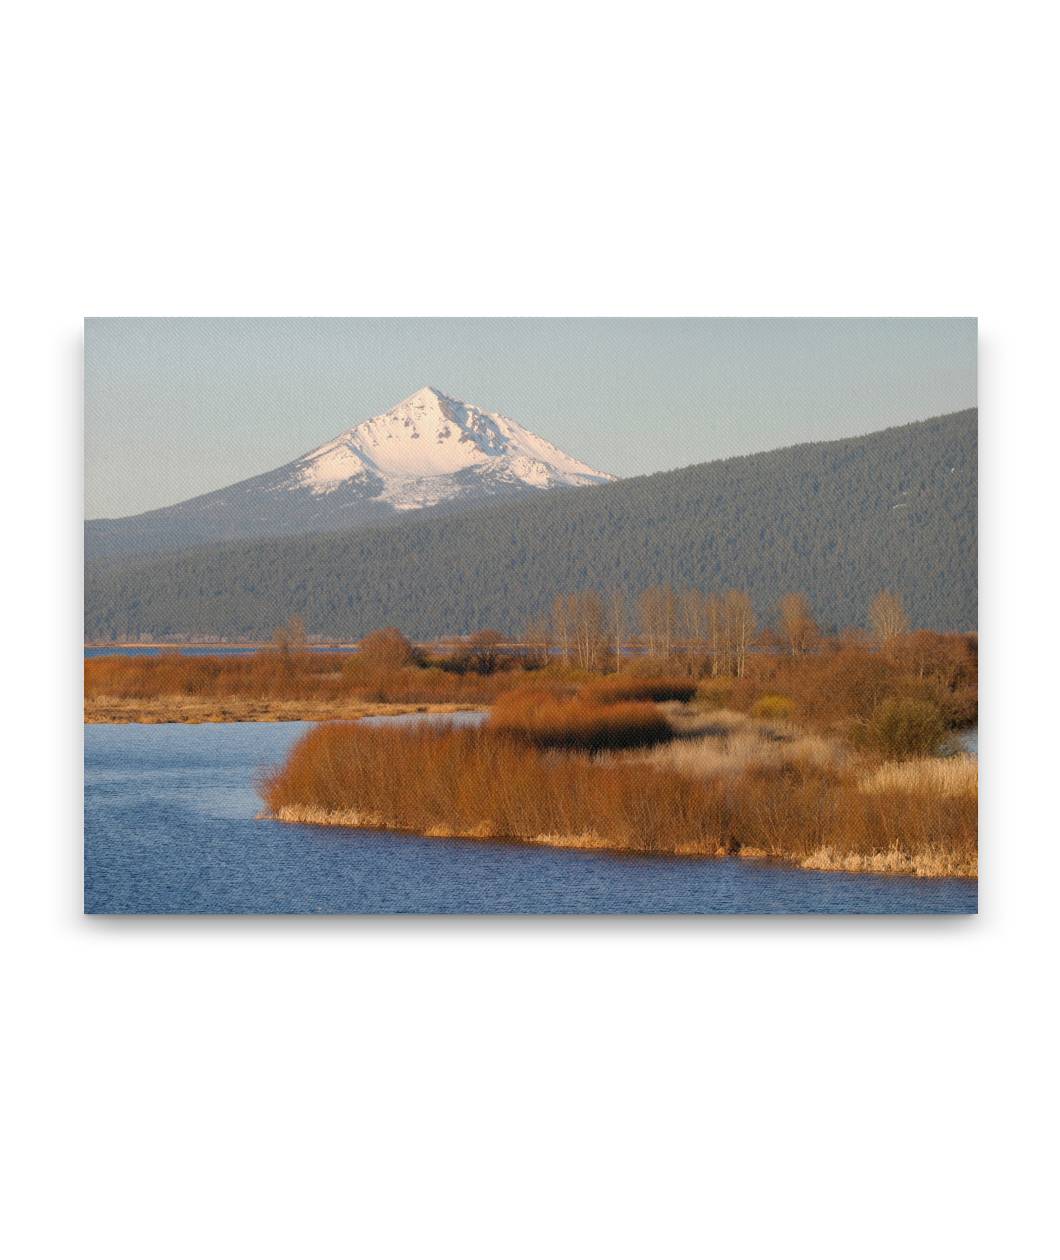 Agency Lake fall colors and Snow-capped Mount McLoughlin, Oregon